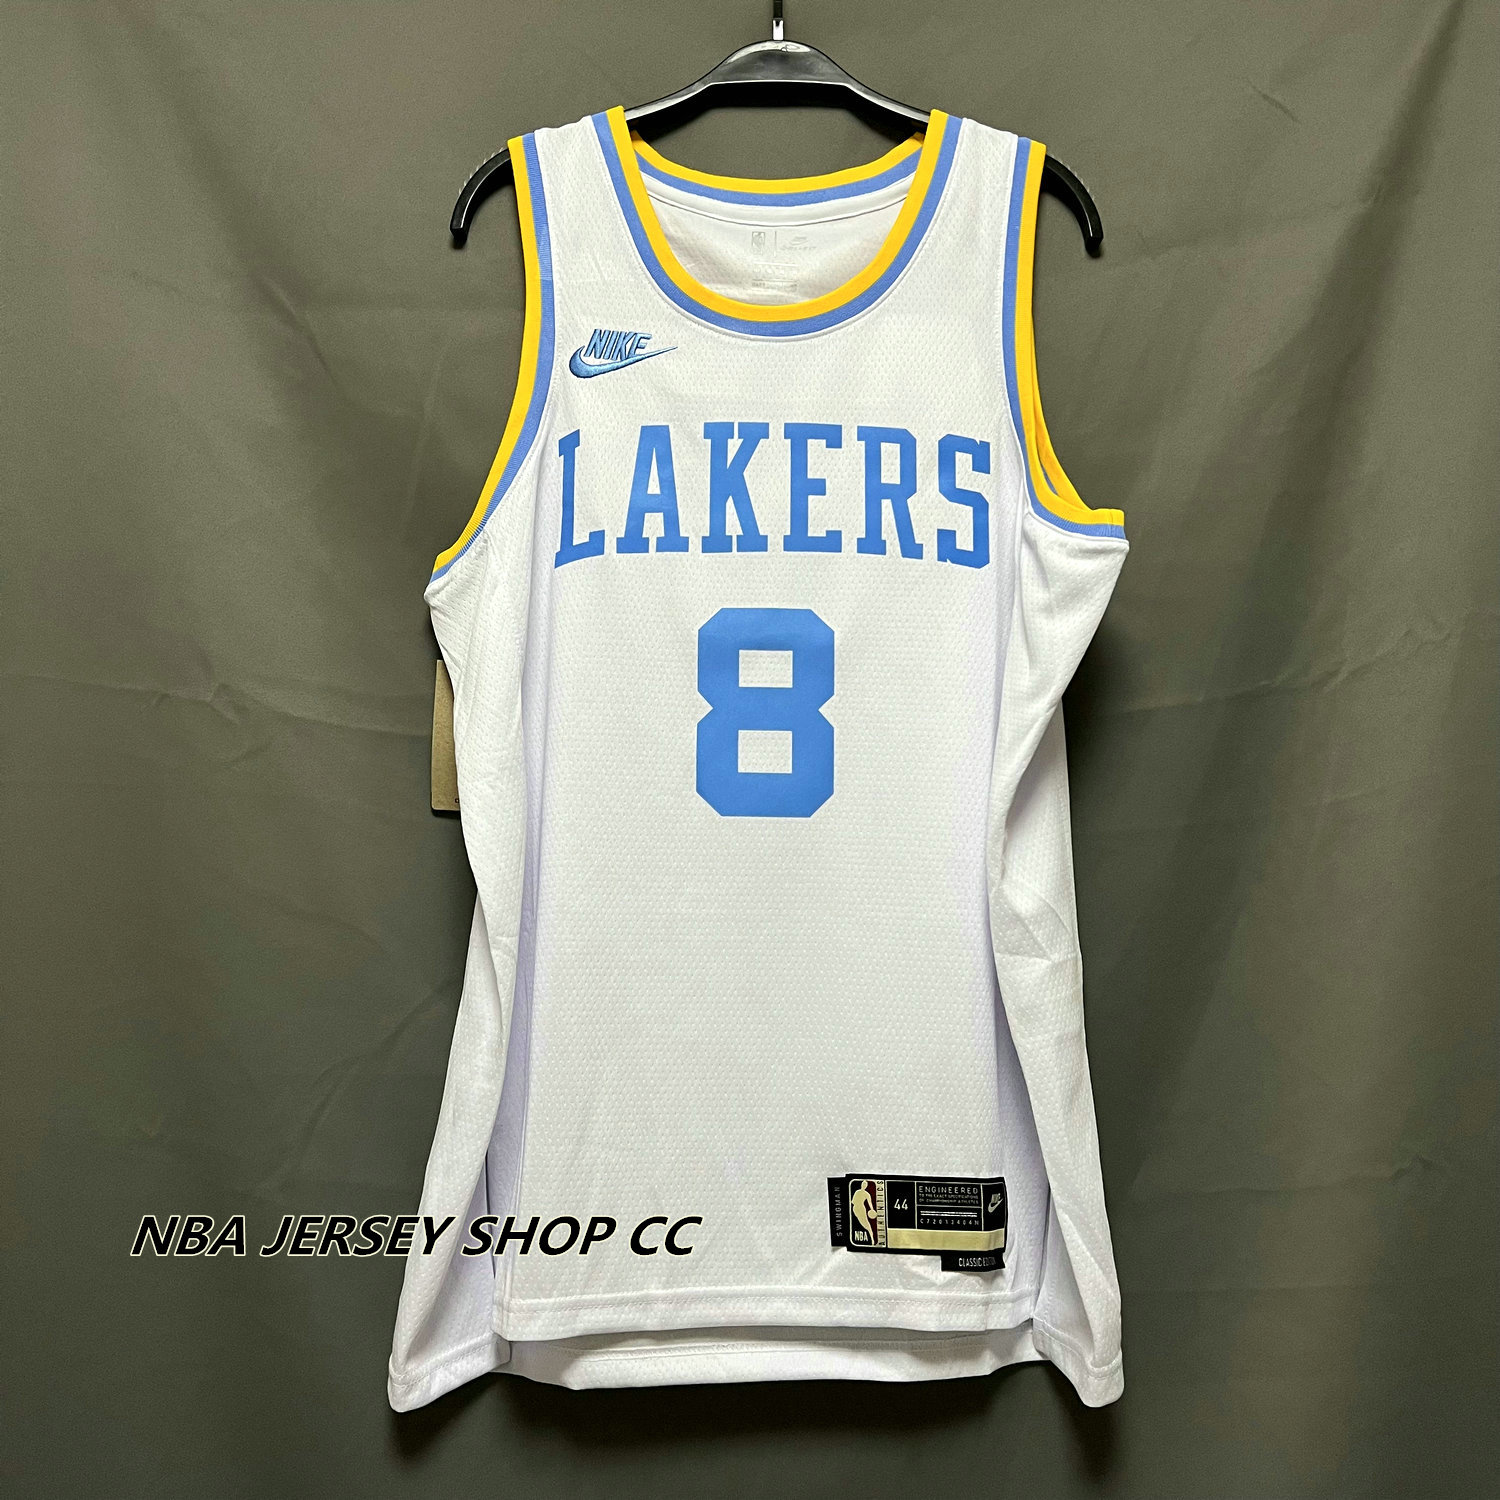 Bryant Rainbow Edition Basketball Jersey for Men,2021 New Lakers